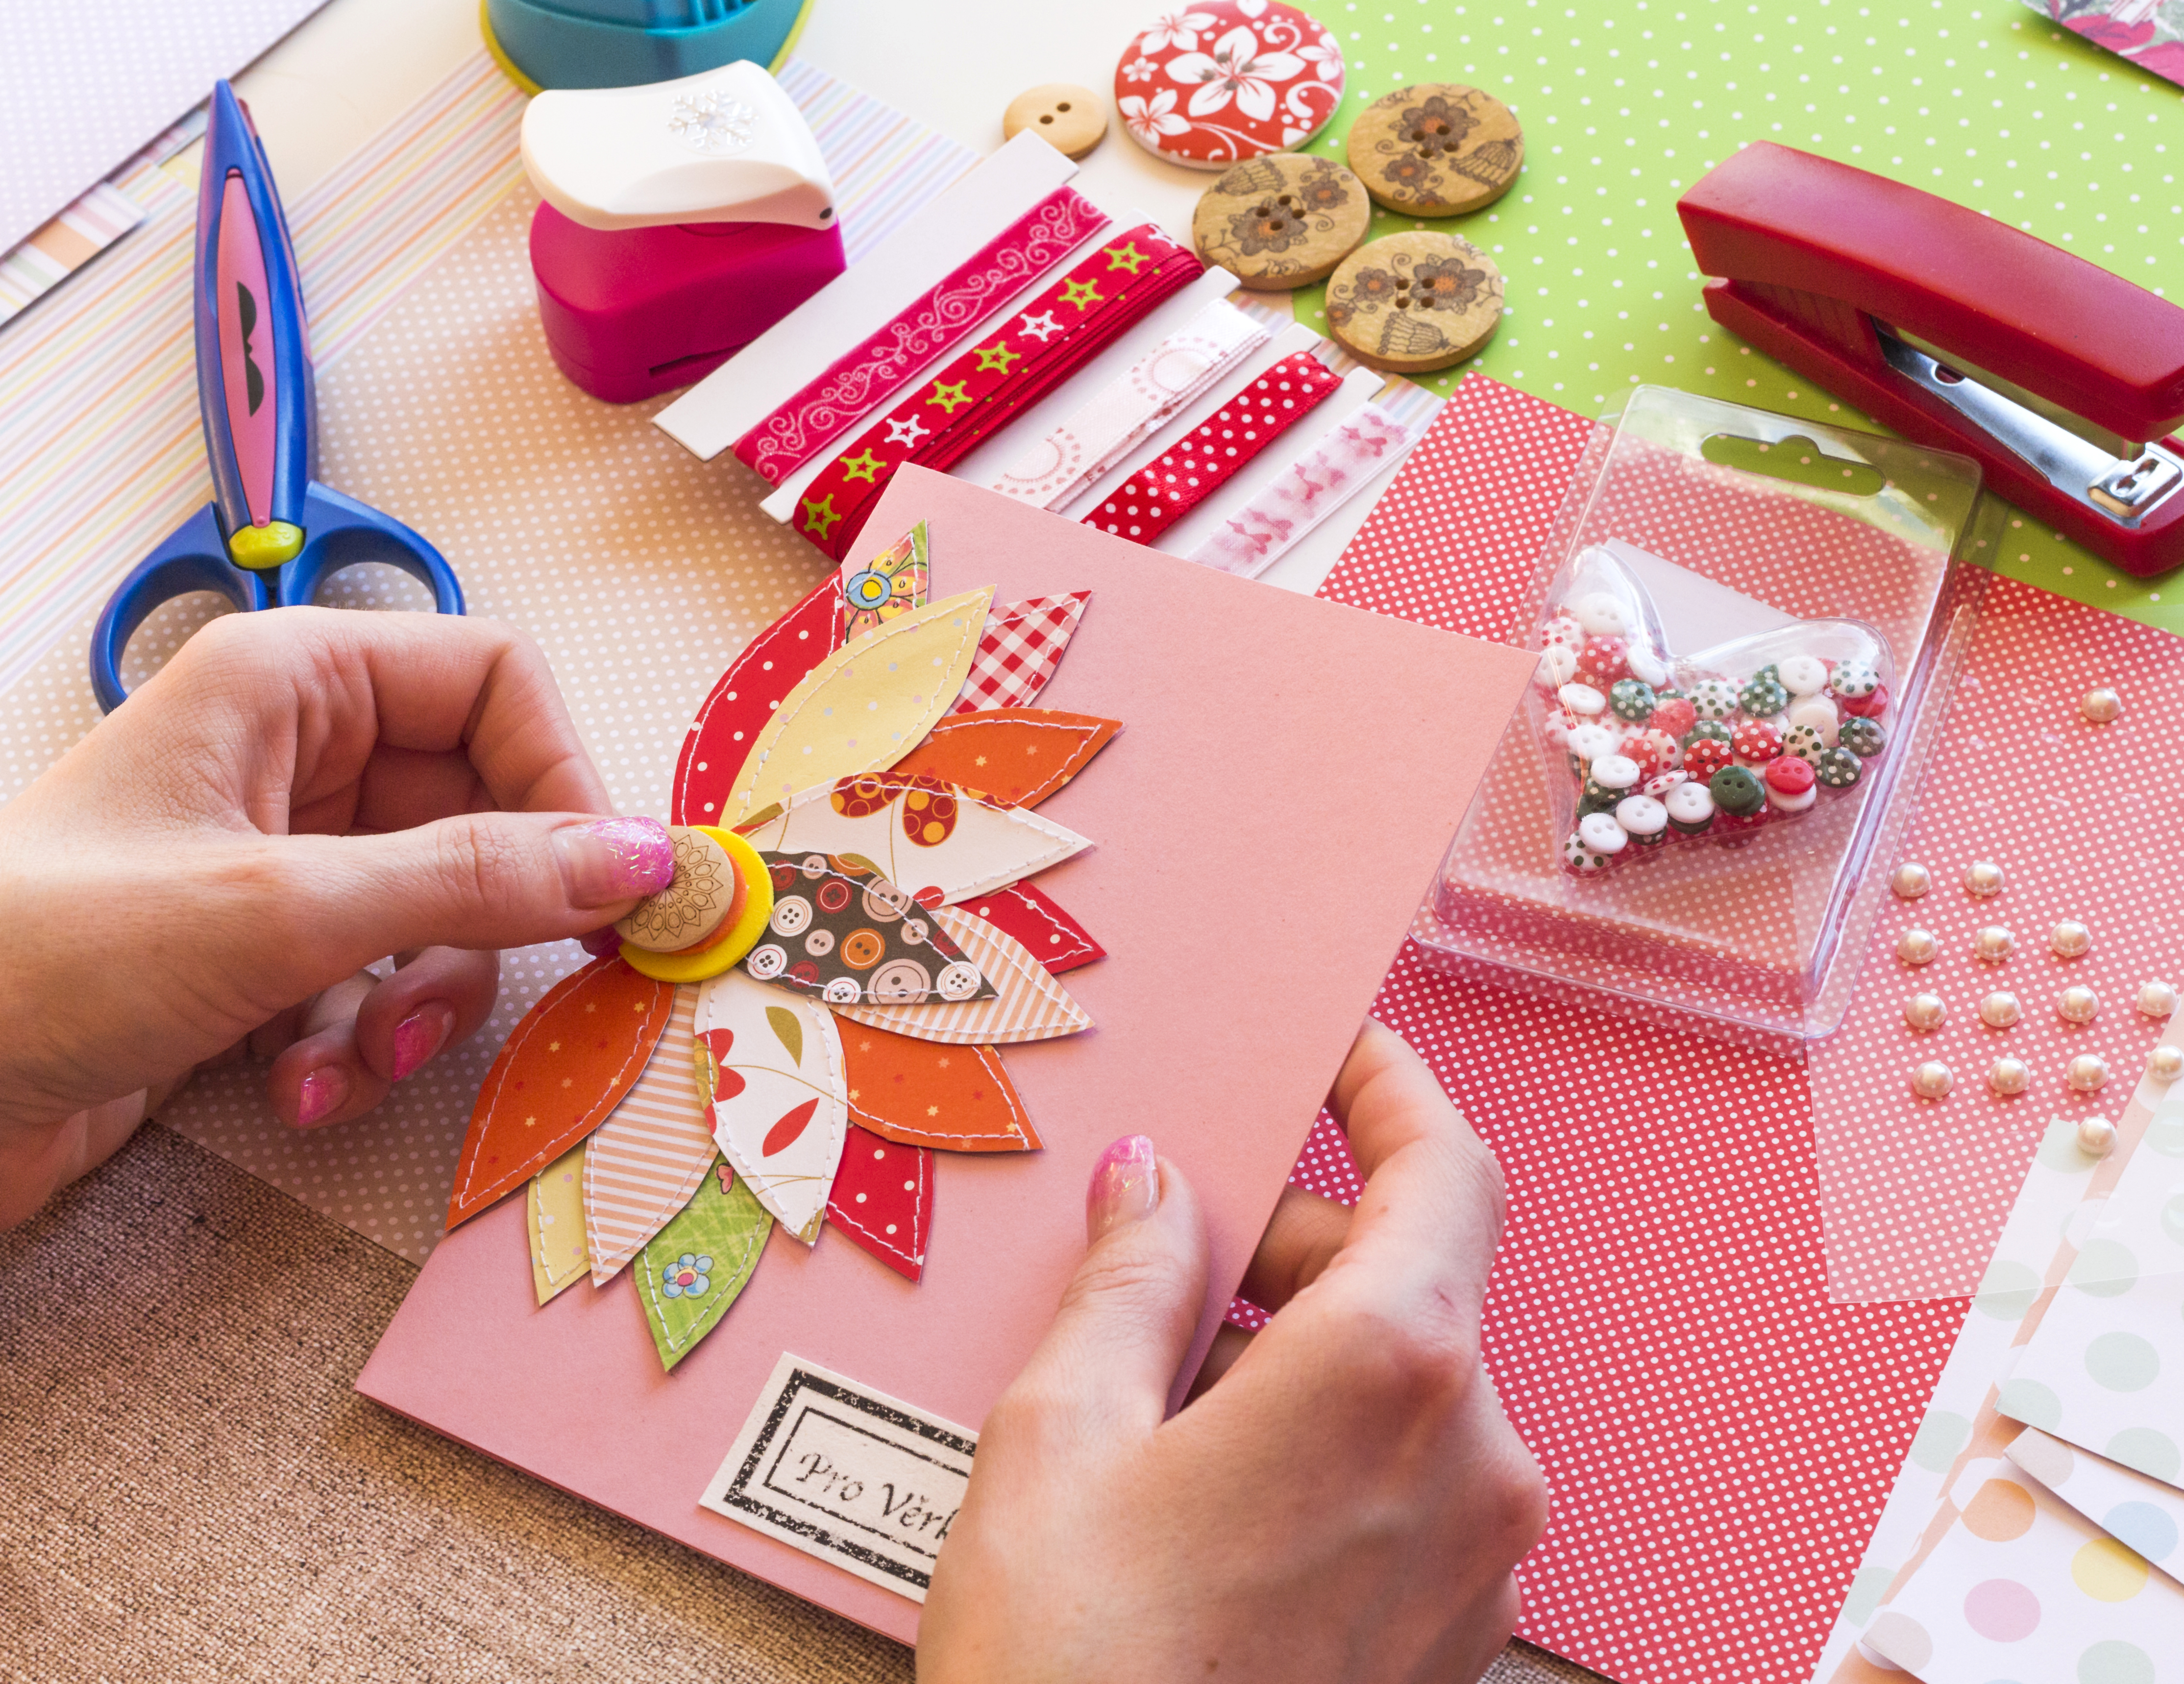 Photo of hands holding a handmade greeting card with cardmaking supplies in the background